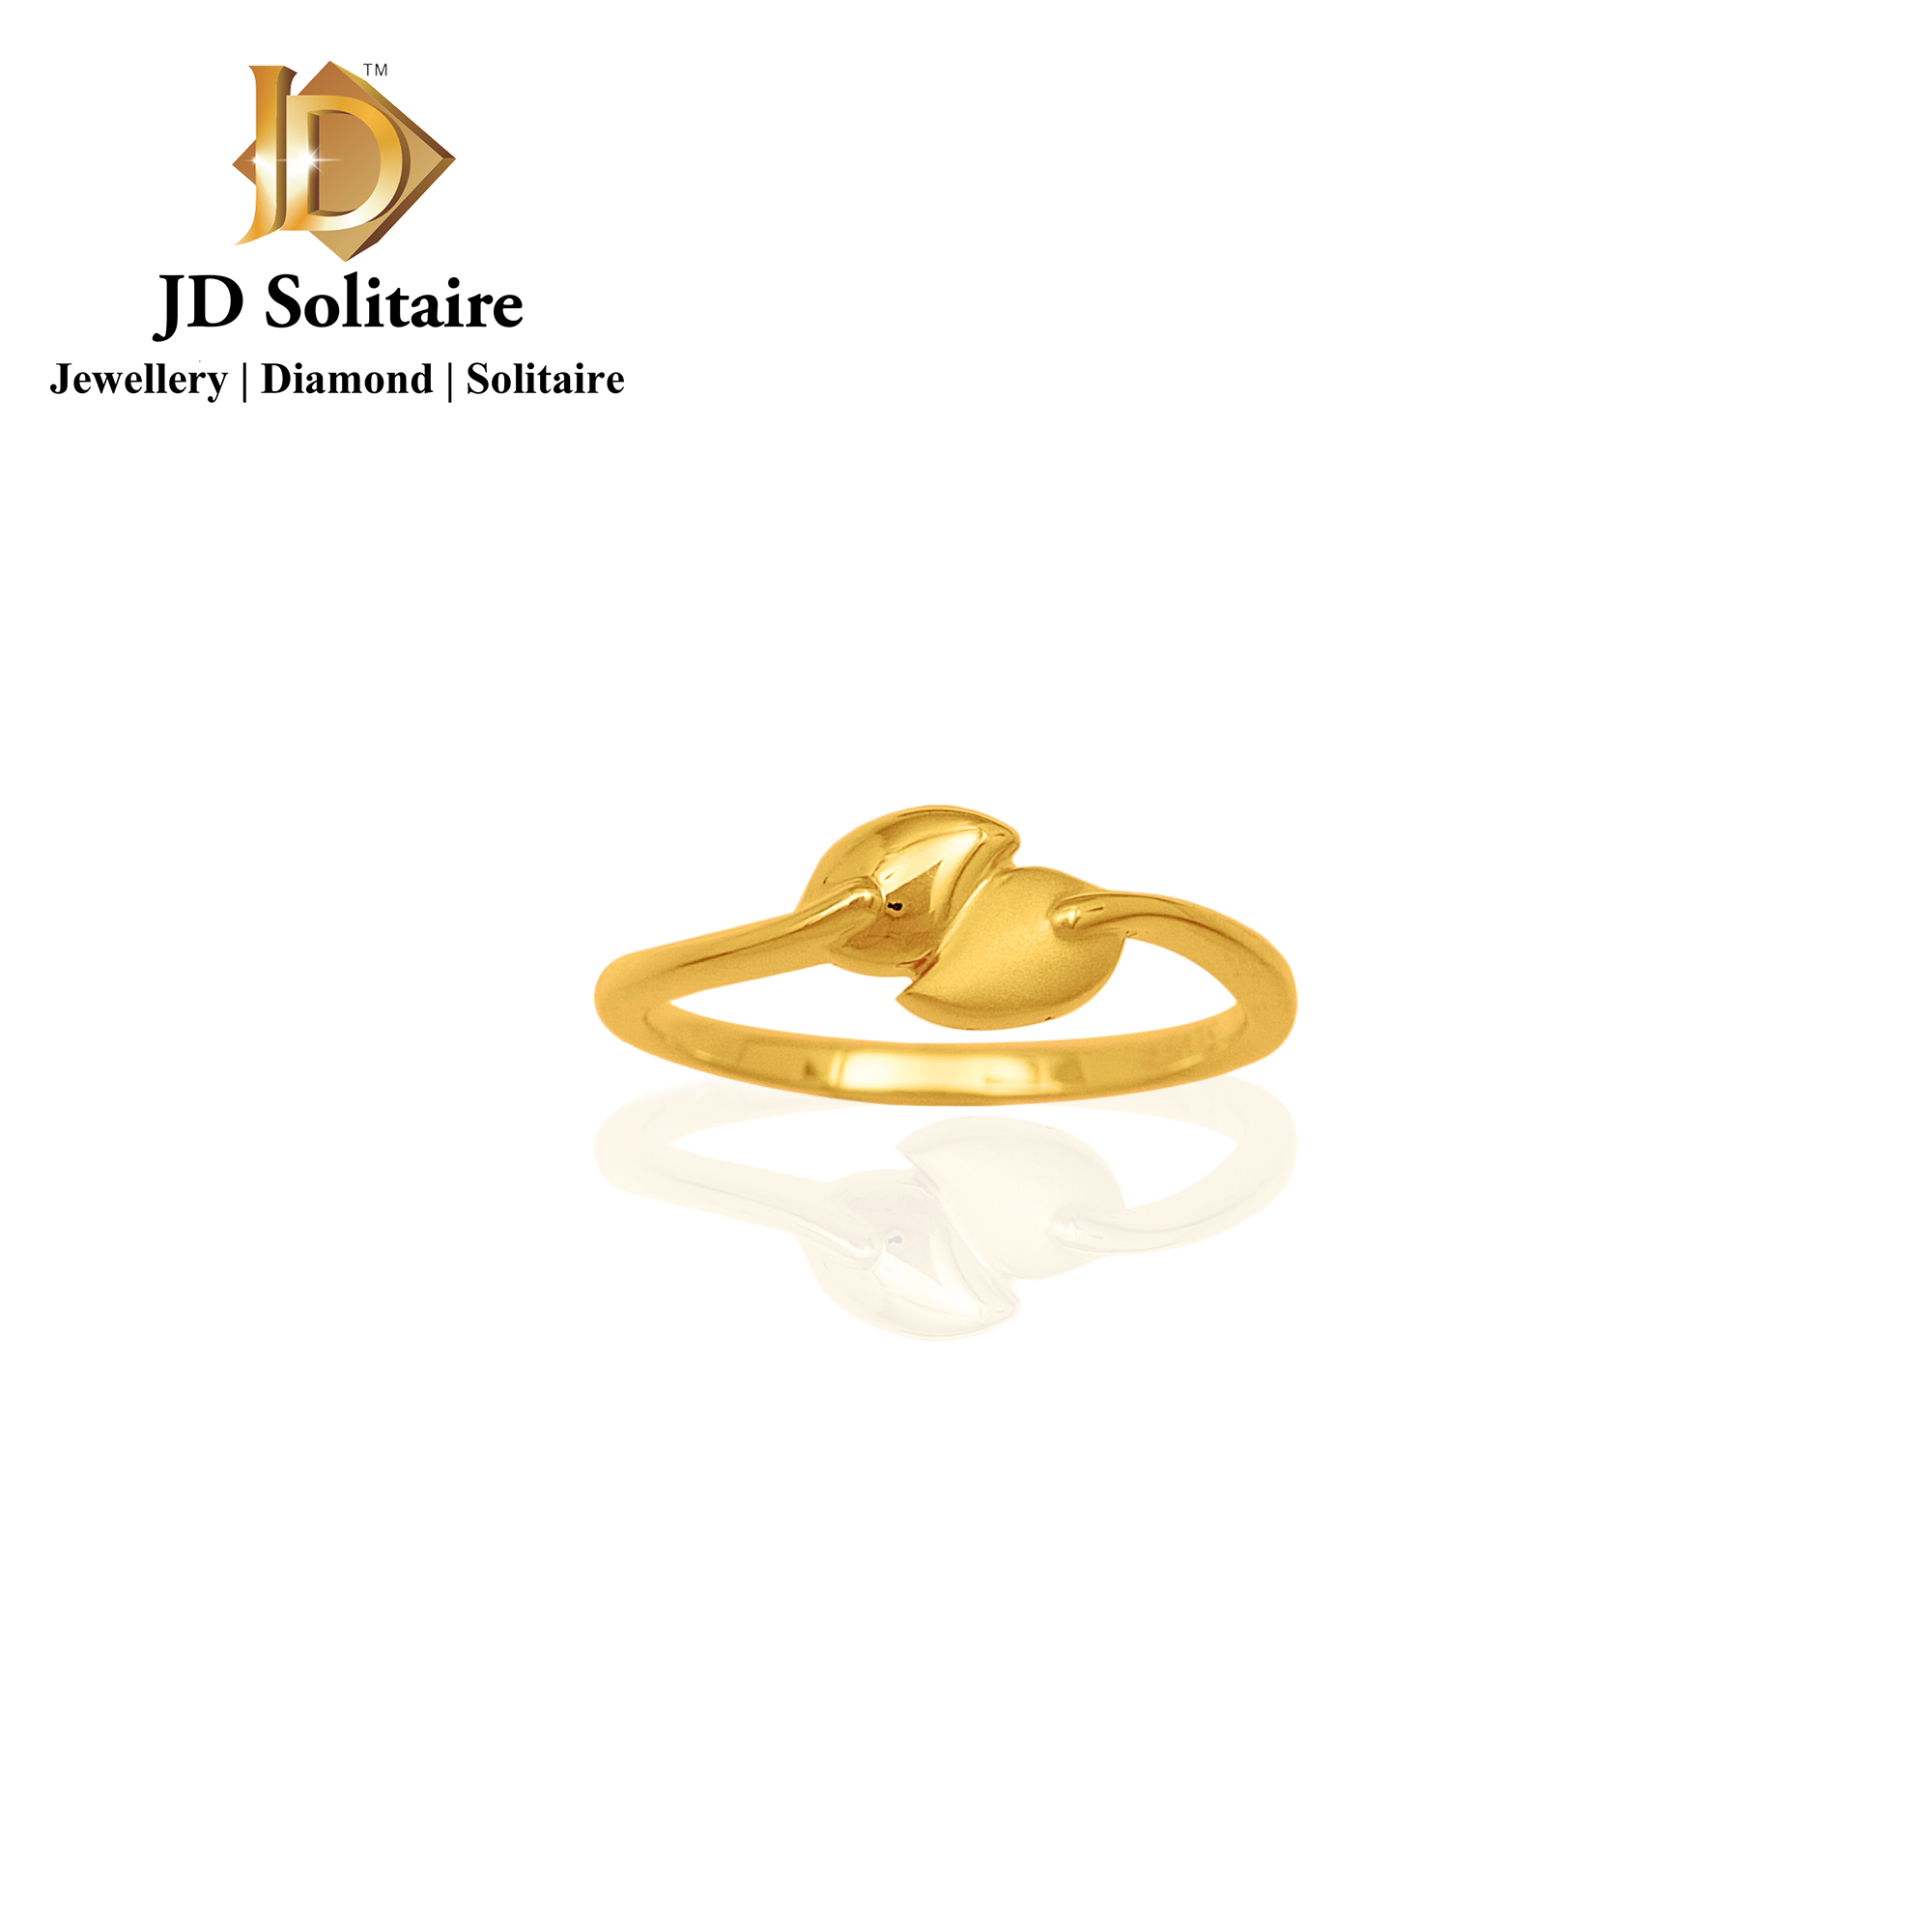 Fashion gold rings for women pictures women – Rings for Women – right hand  ring designs with round diamond stone